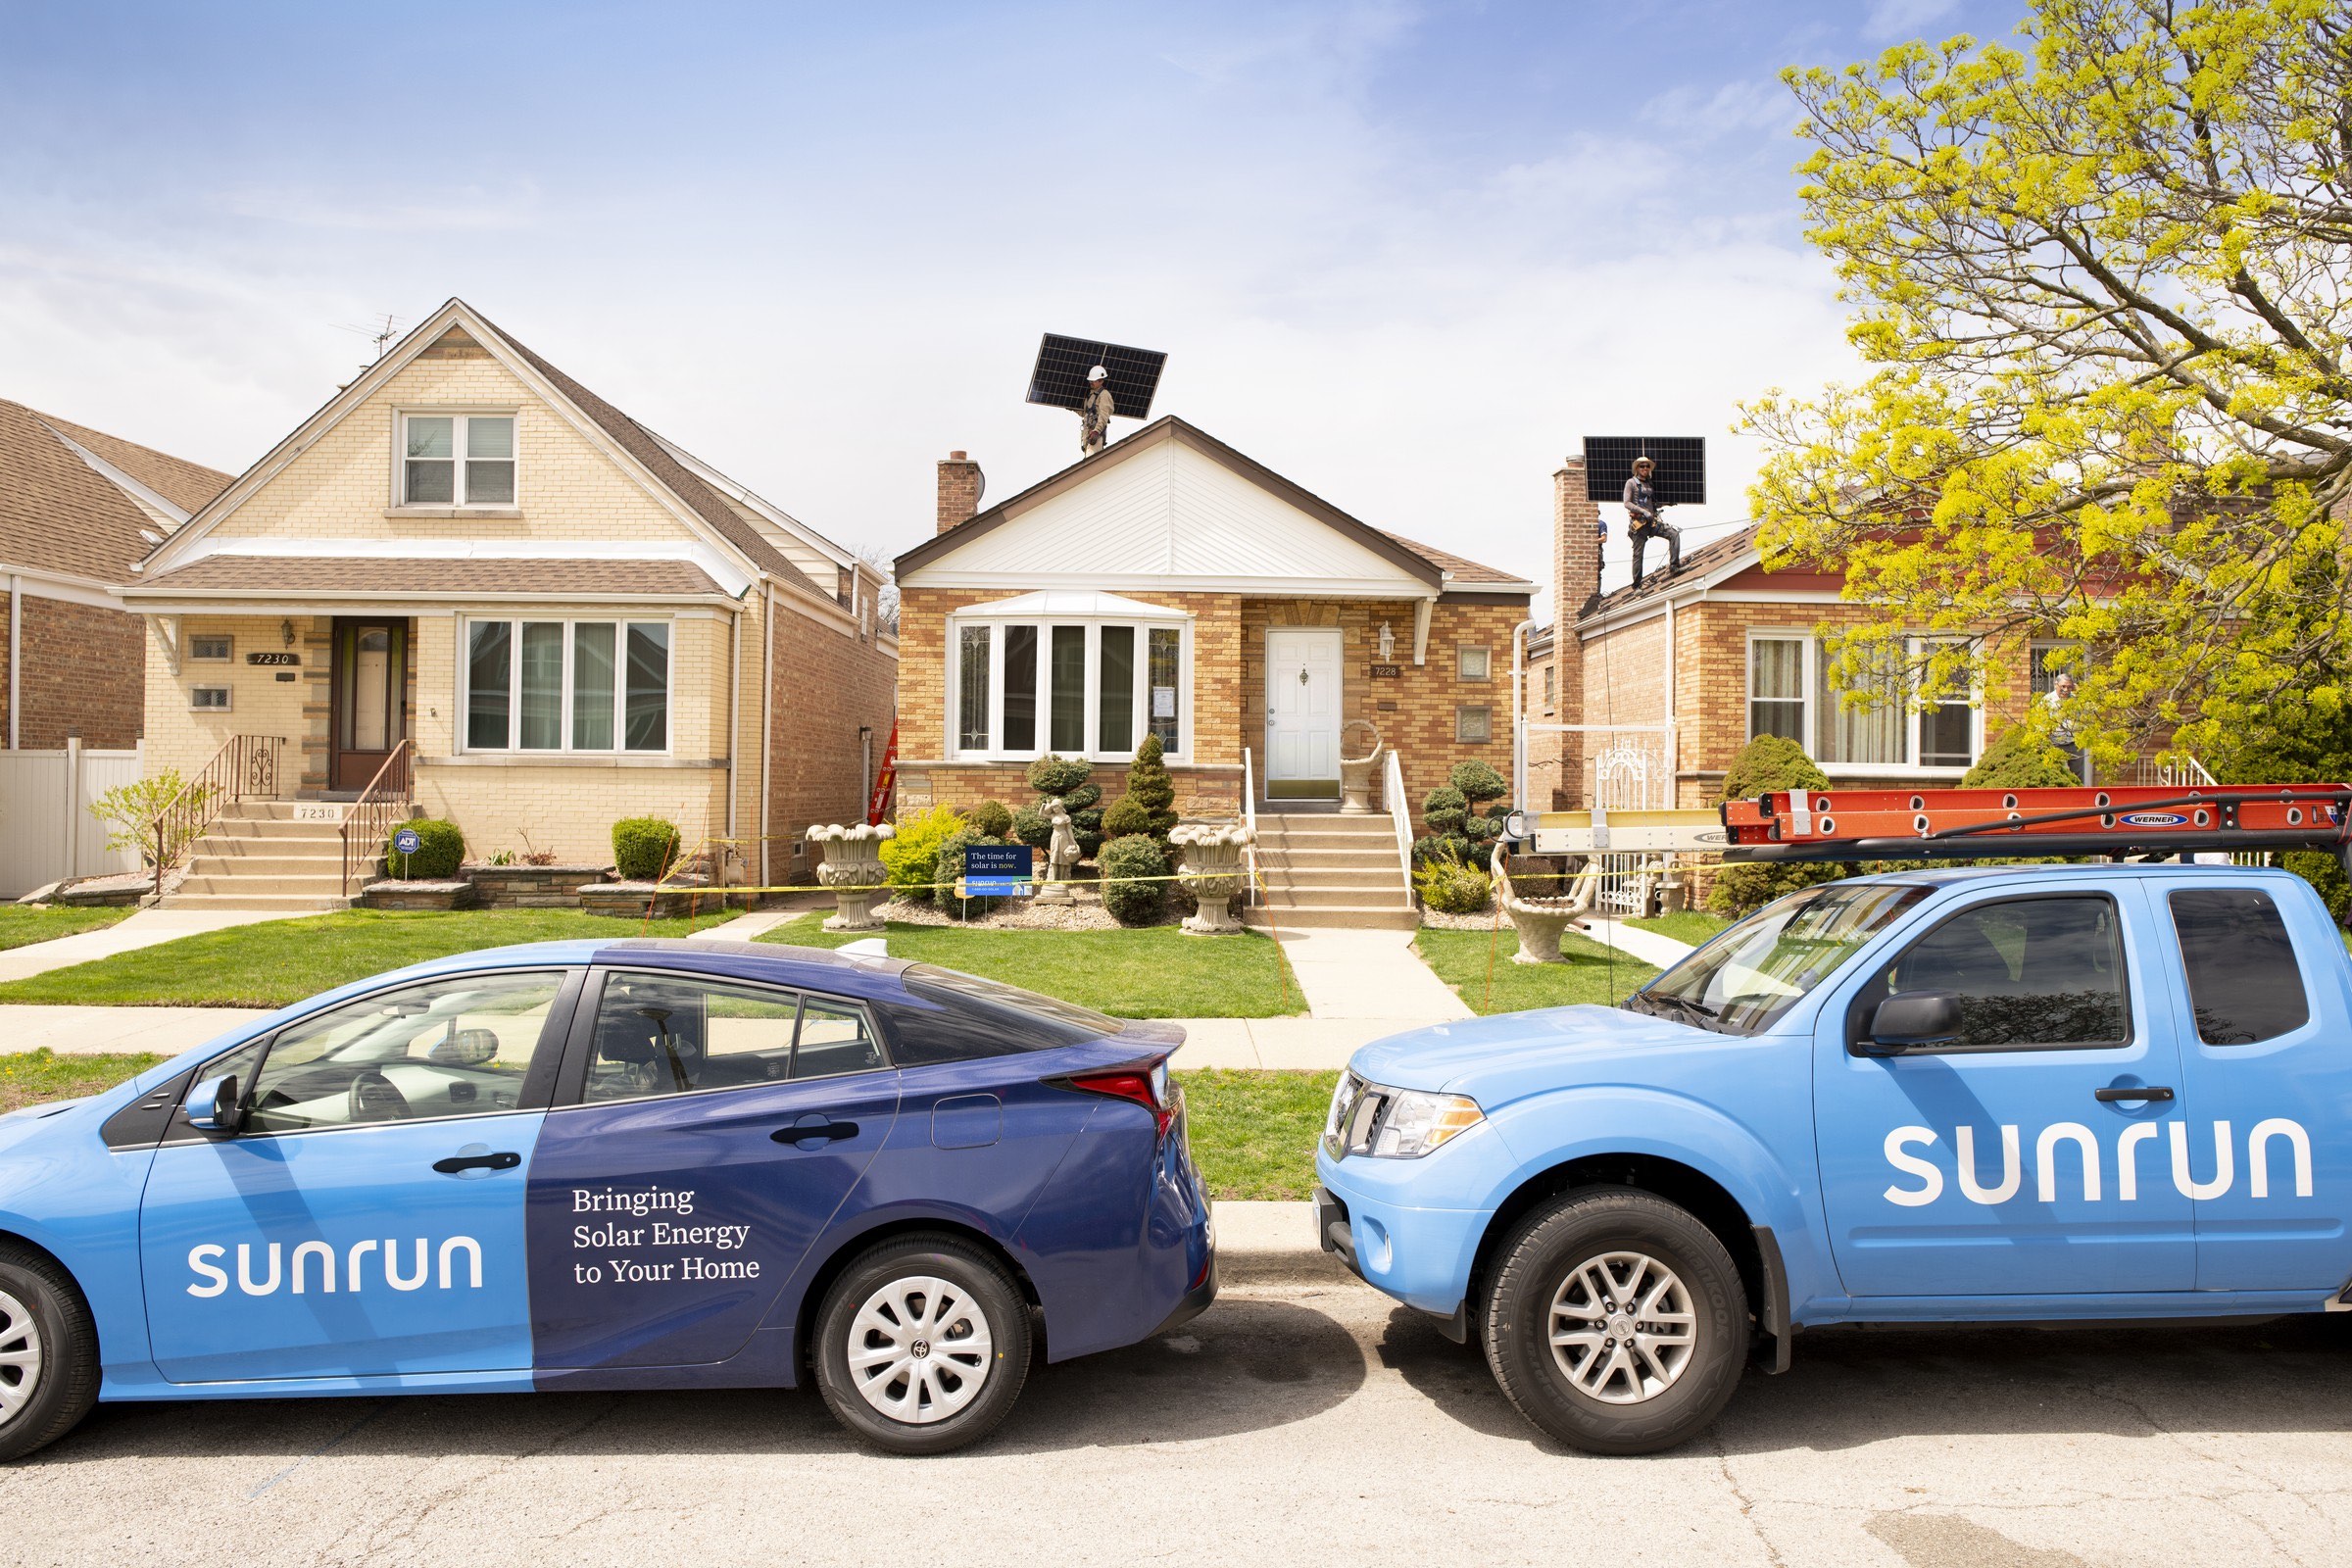 Sunrun opposes utility plan to control all new distributed energy